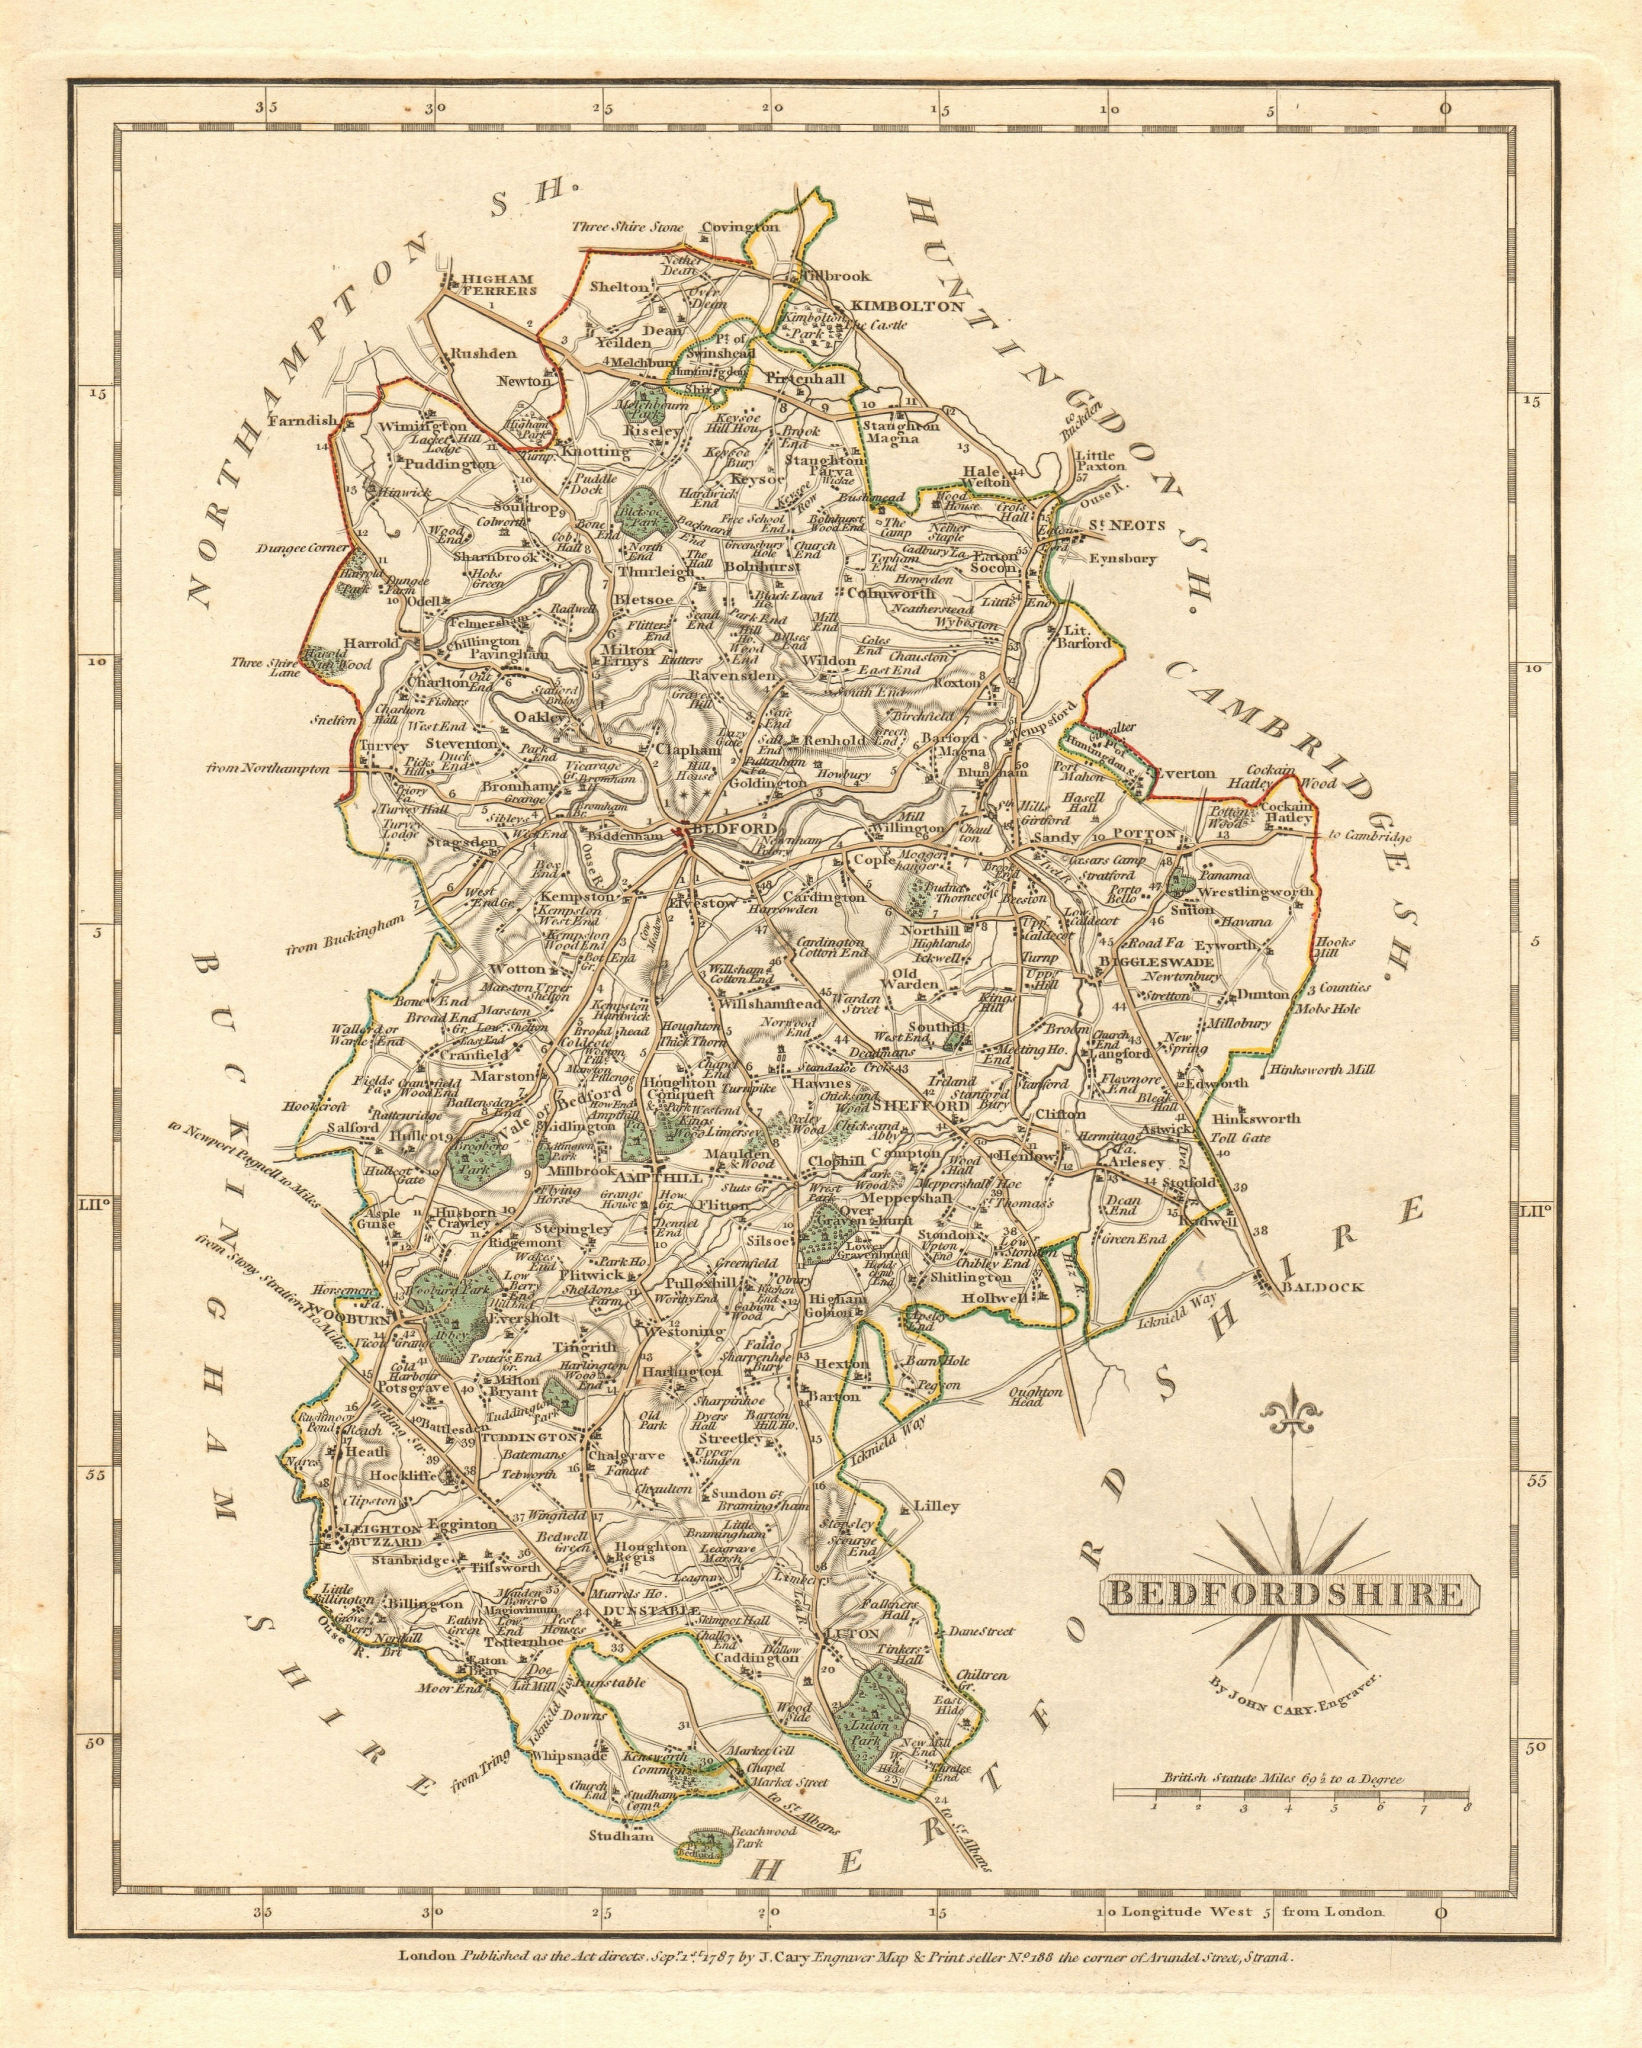 Associate Product Antique county map of BEDFORDSHIRE by JOHN CARY. Original outline colour 1787